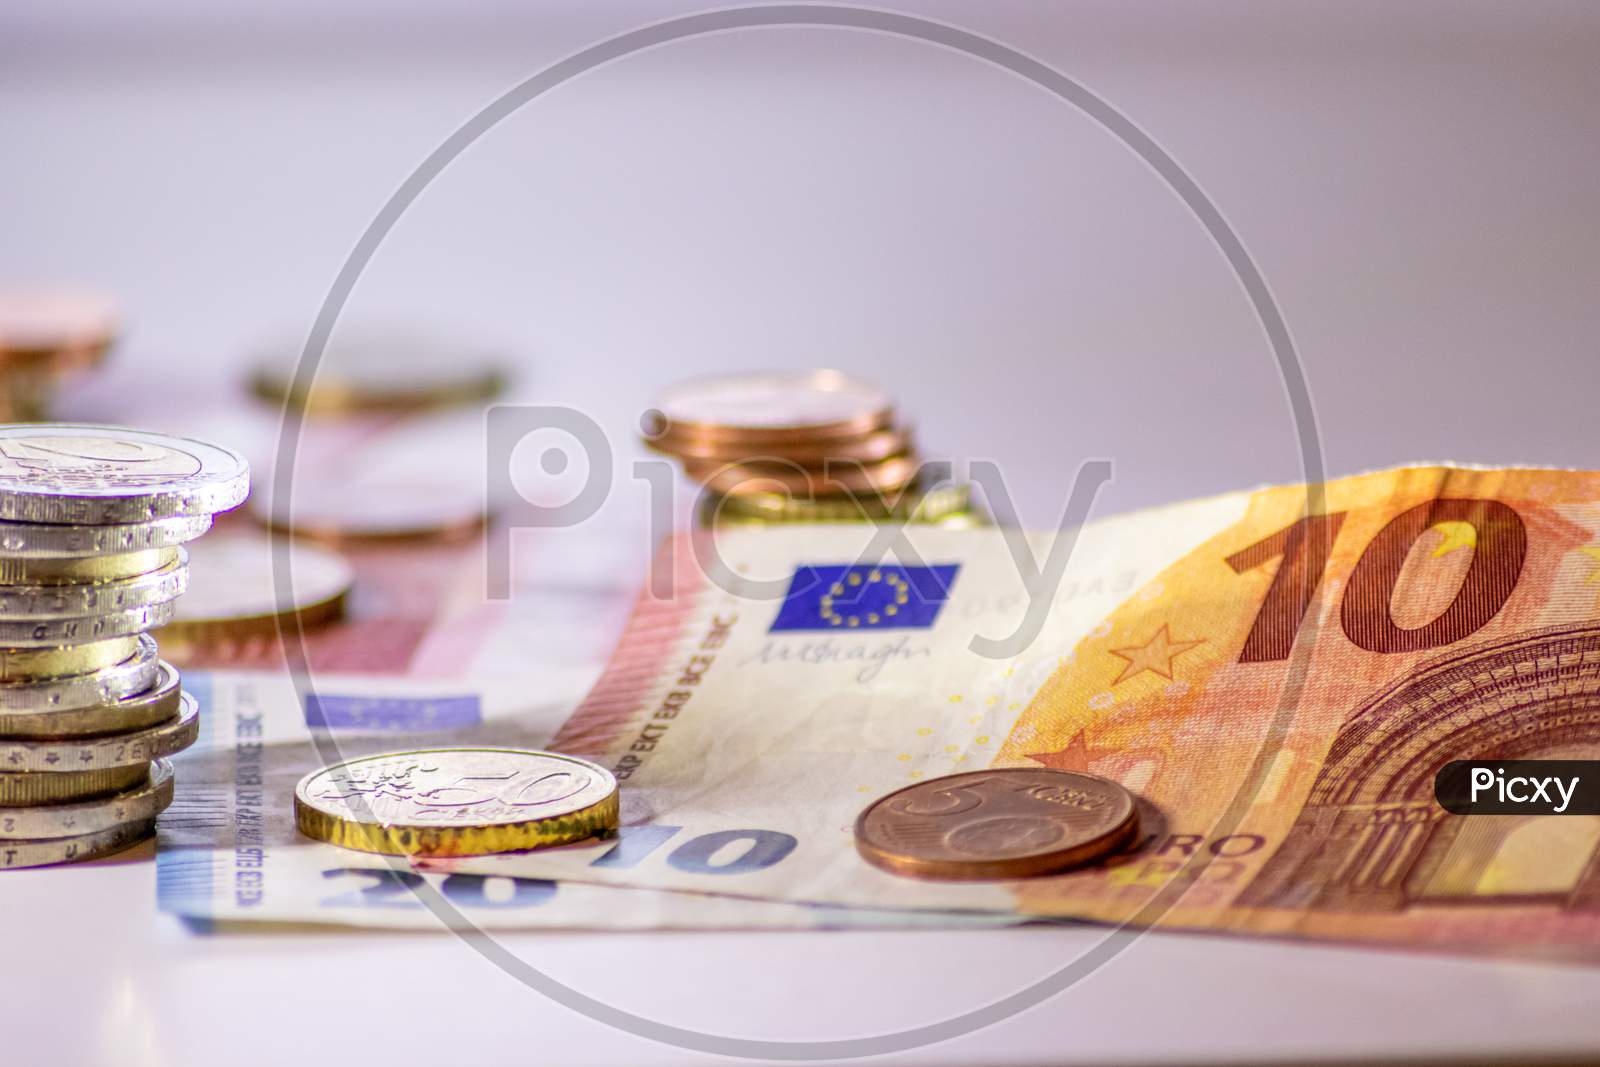 Bunch of european money with coins and bank notes show international finance with euro and europe, bets and wins or financial success as well as credit management and professional banking